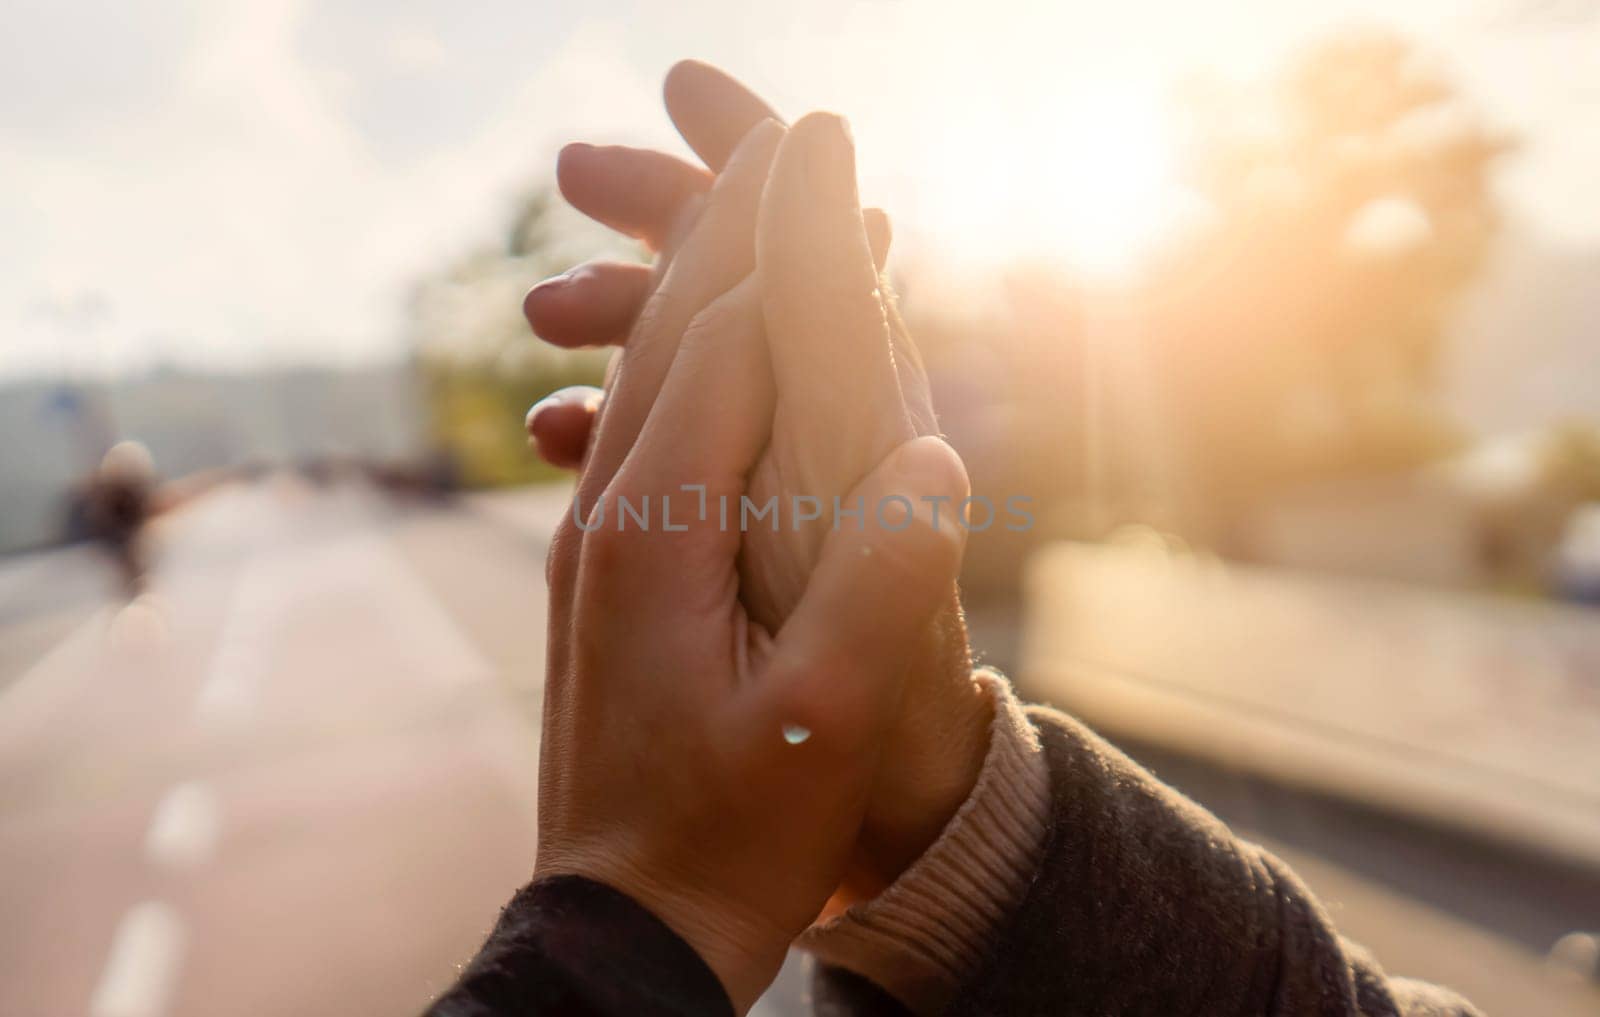 A gentle touch, a man's hand to a woman's hand, an elderly couple holding hands together on a walk in the park in the sun, the husband cares and supports his wife.